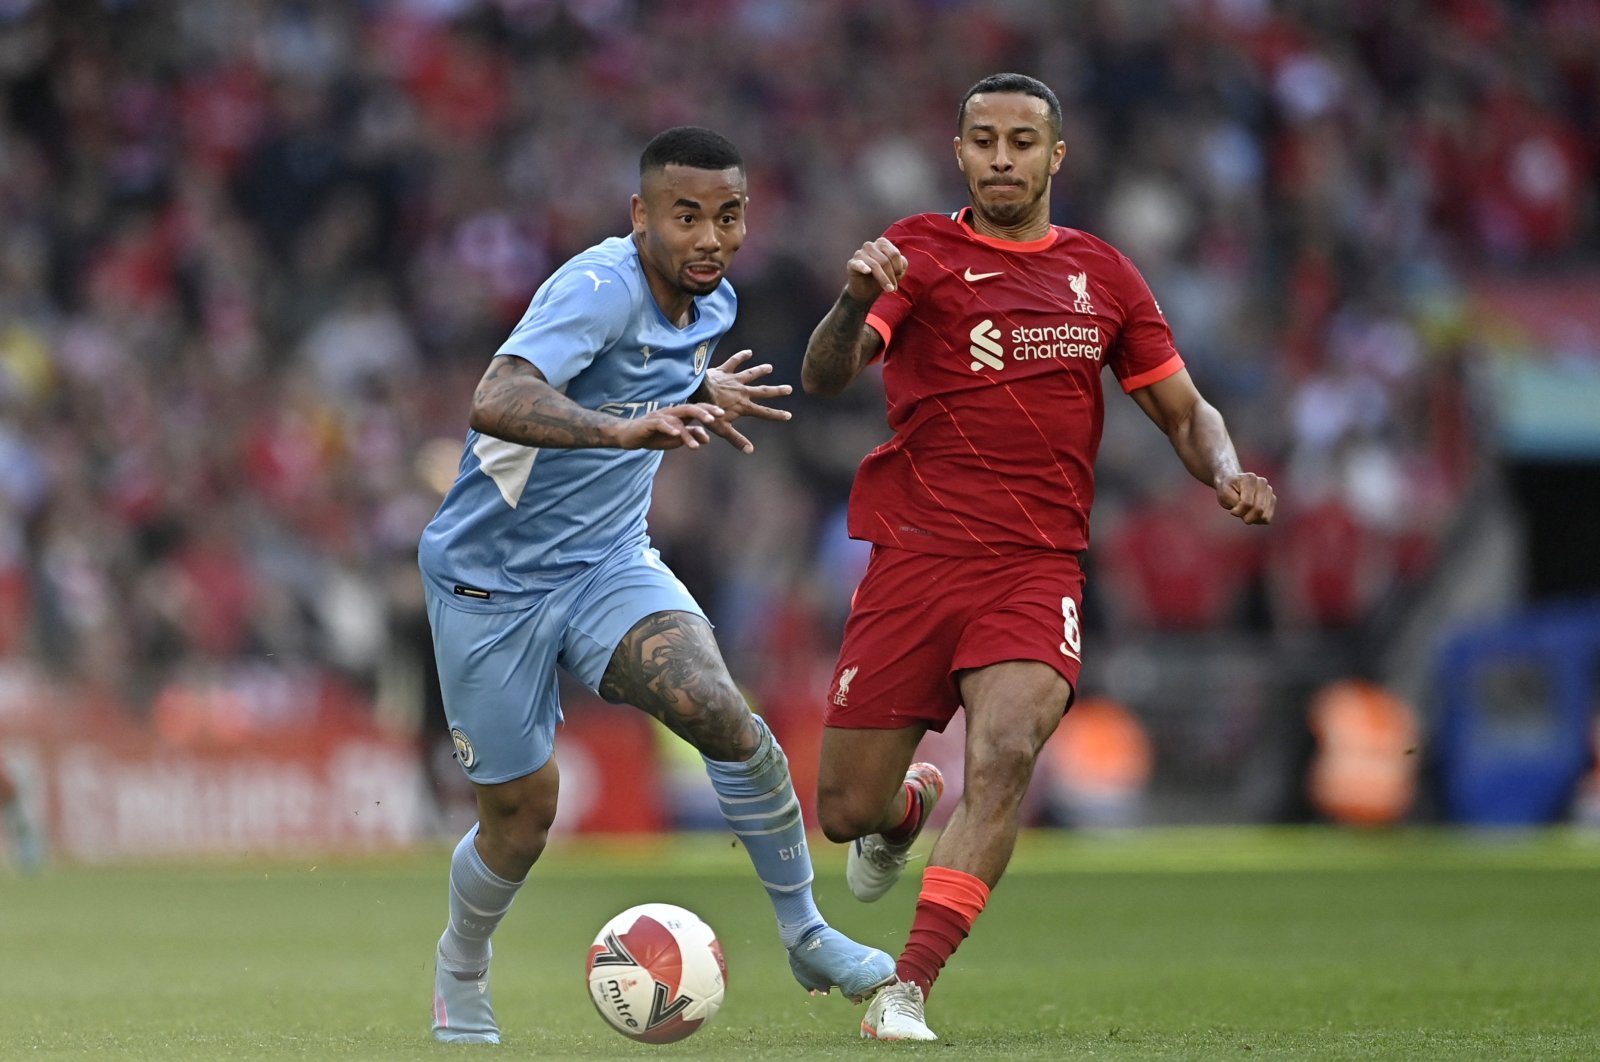 Manchester City&#039;s Gabriel Jesus in action with Liverpool&#039;s Naby Keita during an FA Cup semifinal match at the Wembley Stadium, in London, Britain, April 16, 2022. (Reuters Photo)
